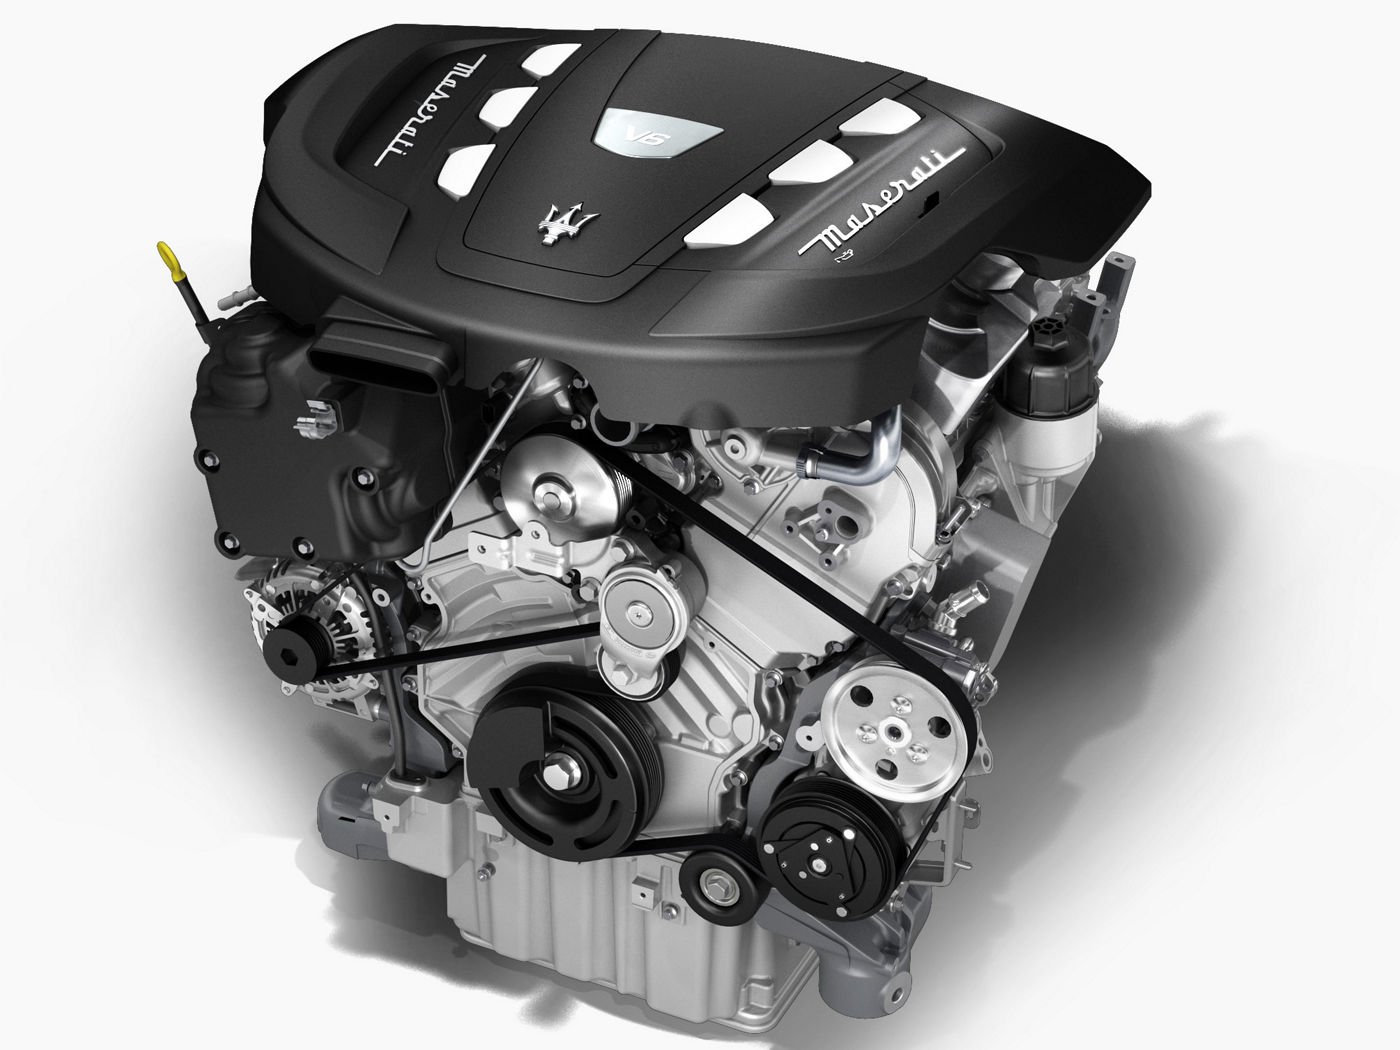 V6 diesel engine for the Maserati Ghibli model: structure and details